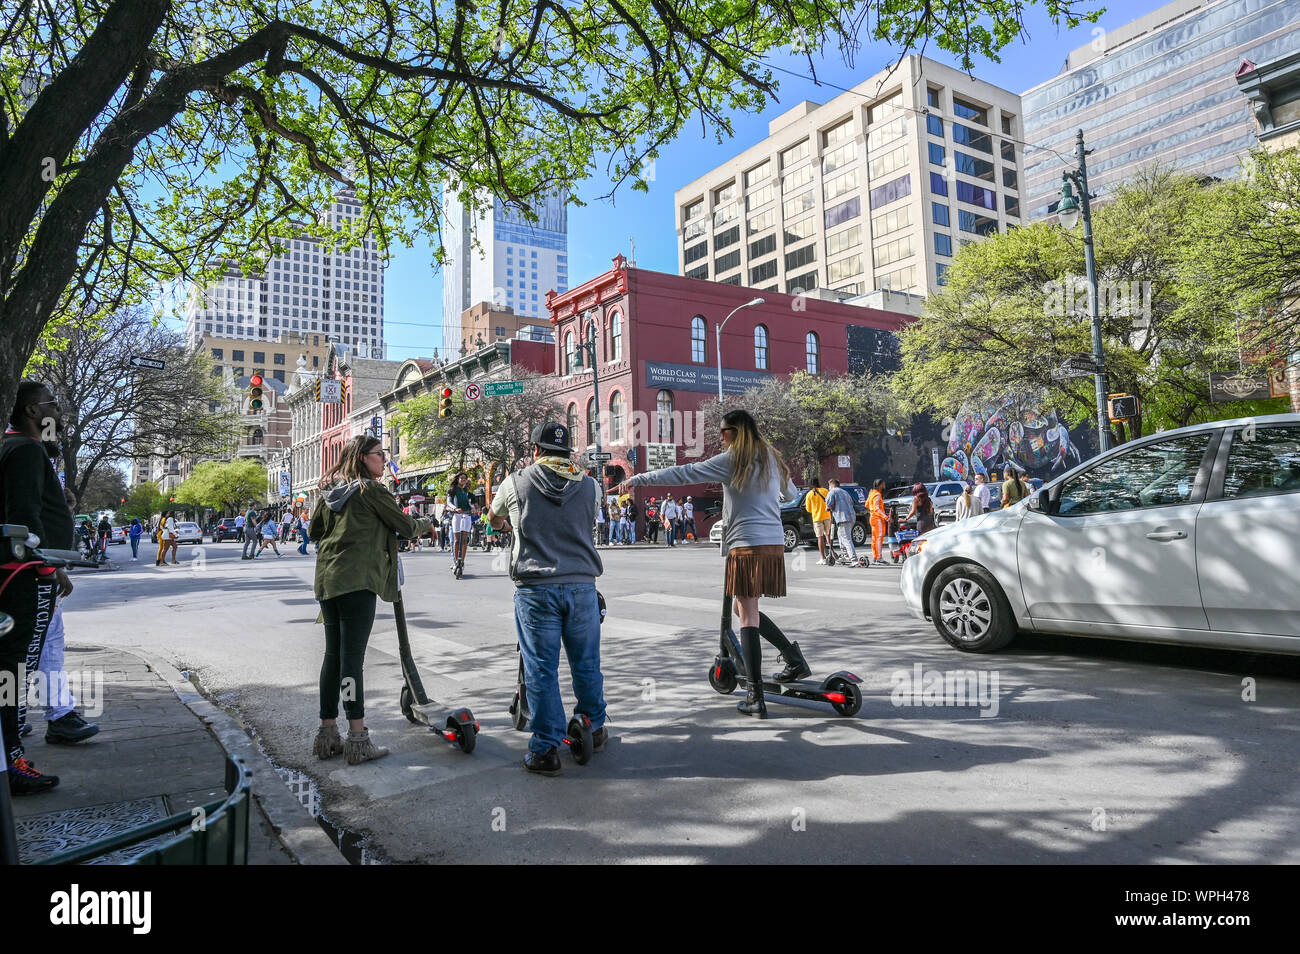 People ride e-scooters on Sixth Street in Austin Texas during SXSW festival in March 2019. Stock Photo